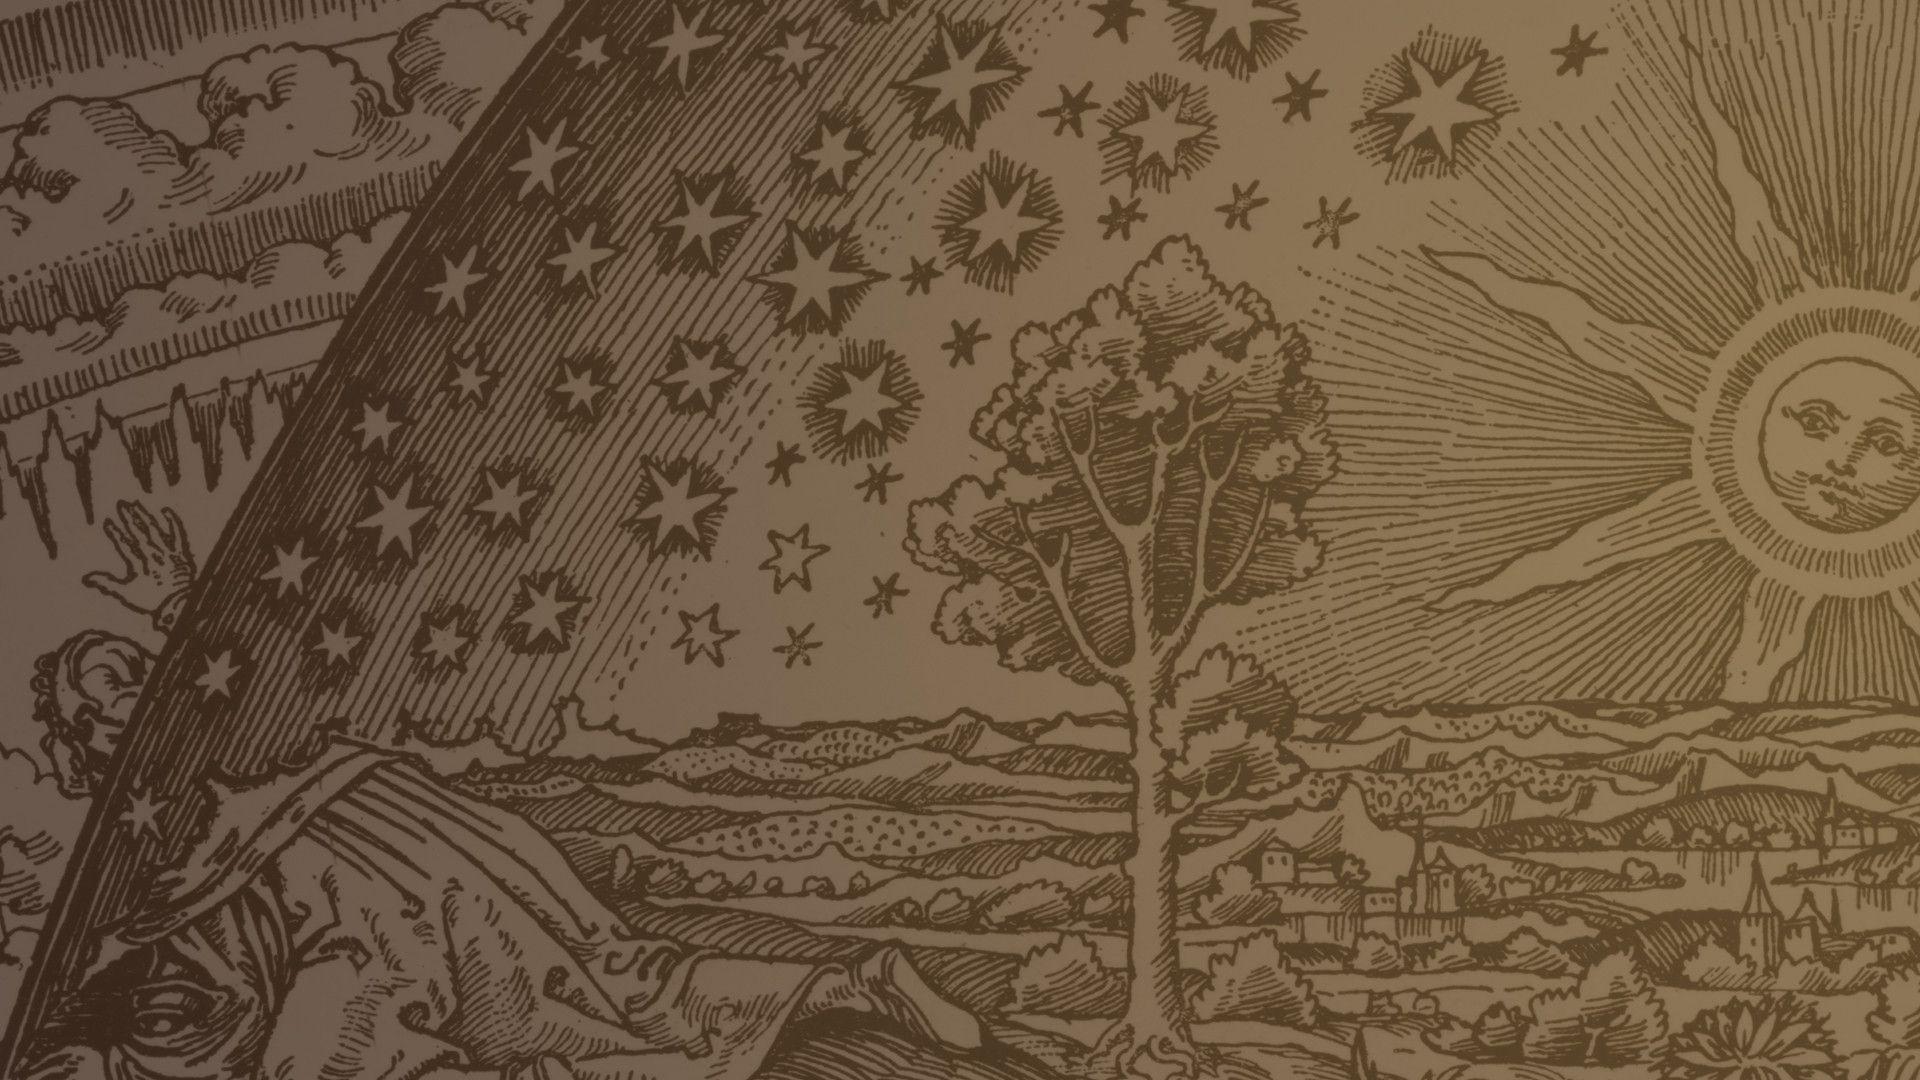 Weekly Wallpaper: Old school maps and sky charts